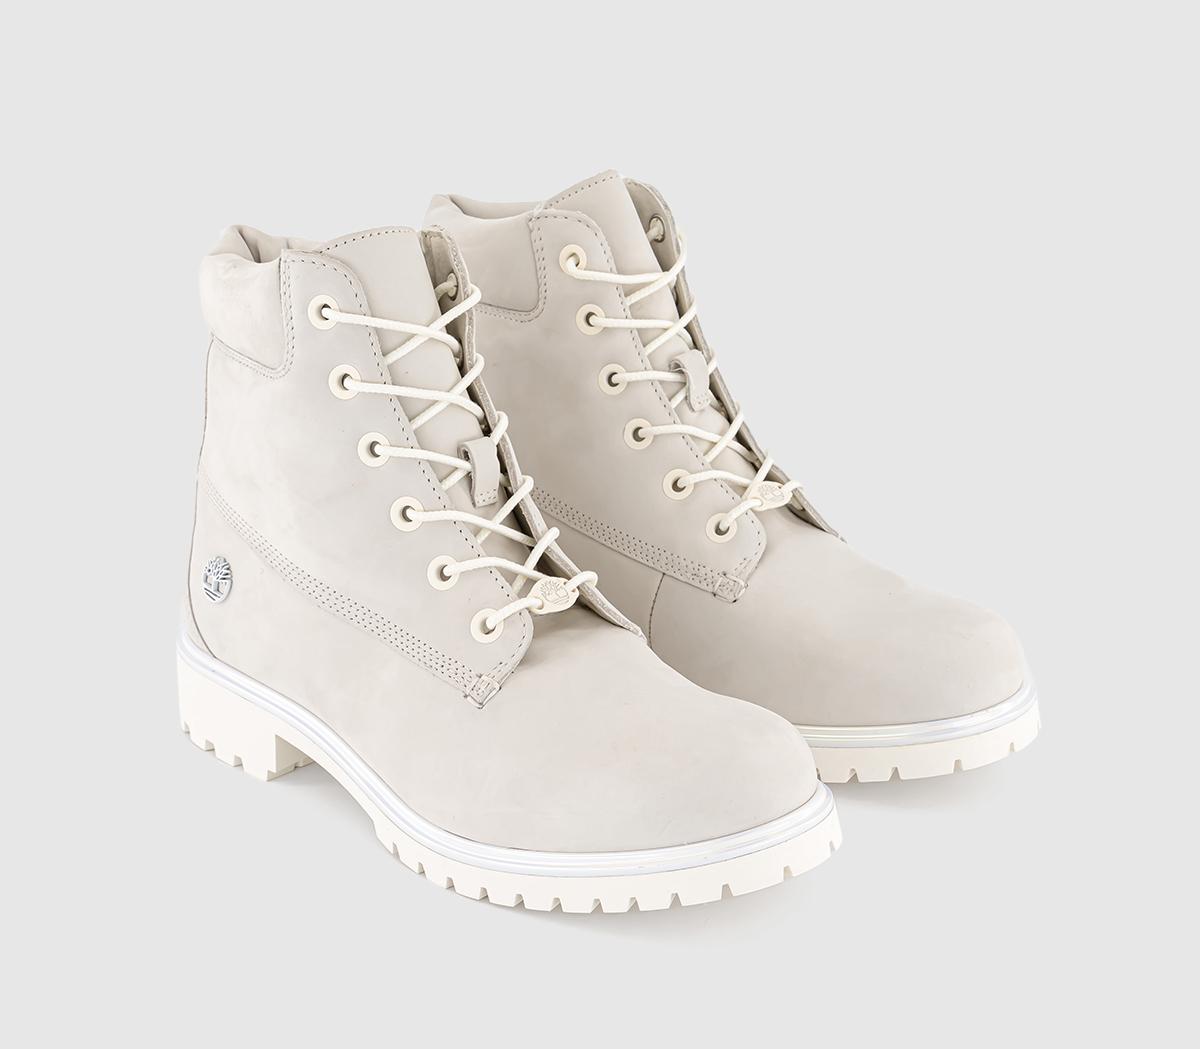 Timberland Womens Lyonsdale Boots Cream Irridescent Natural, 7